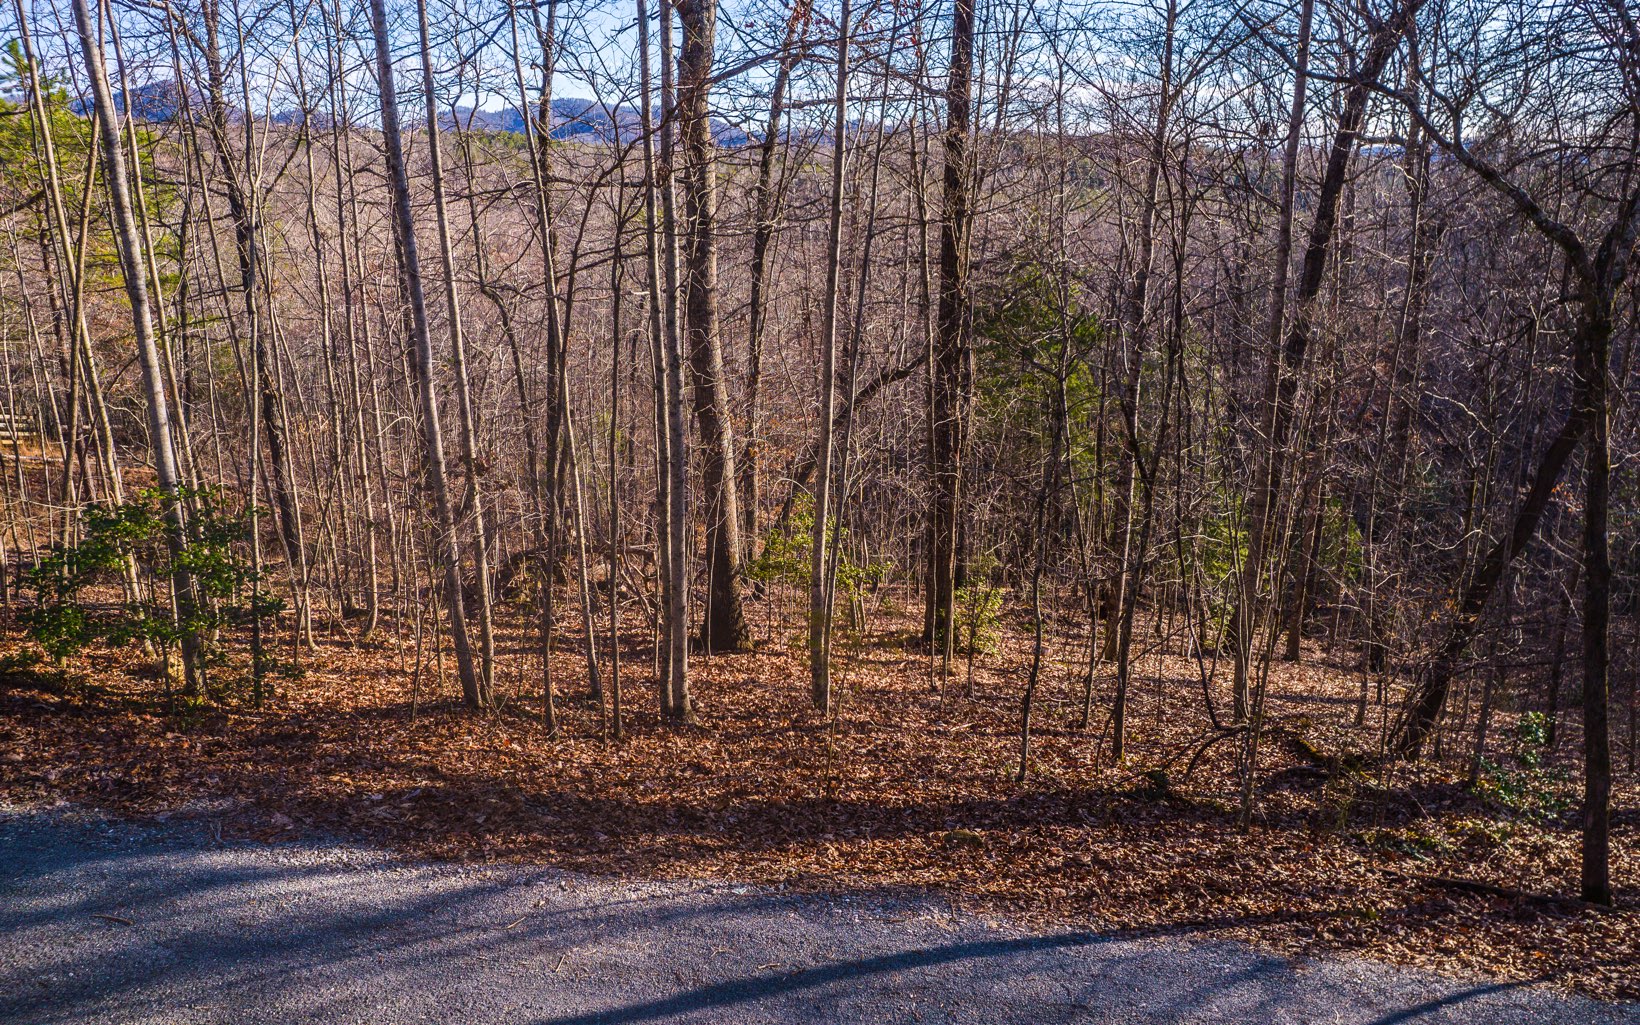 Amazing opportunity to build your dream cabin on popular Antioch Cemetery Road in Morganton, just a short distance to charming downtown Blue Ridge; and all of the outdoor activities in the area that await! Enjoy a beautiful mountain view off of your soon-to-be back porch. Across the street from this lightly wooded & private lot is 138+ acres of US Forest, with a view of Lake Blue Ridge as the backdrop. It doesn't get much better! This lot is ready to go: soil work & survey available, tap in to shared well, electric & internet available. Very gentle grade cuts down on building costs. This is a beautiful lot on a great county road; paved access just shy of where this lot begins...not getting stuck here in the winters...easy terrain. Call for more info! Close to Blue Ridge Marina, Toccoa River activities & hiking and biking